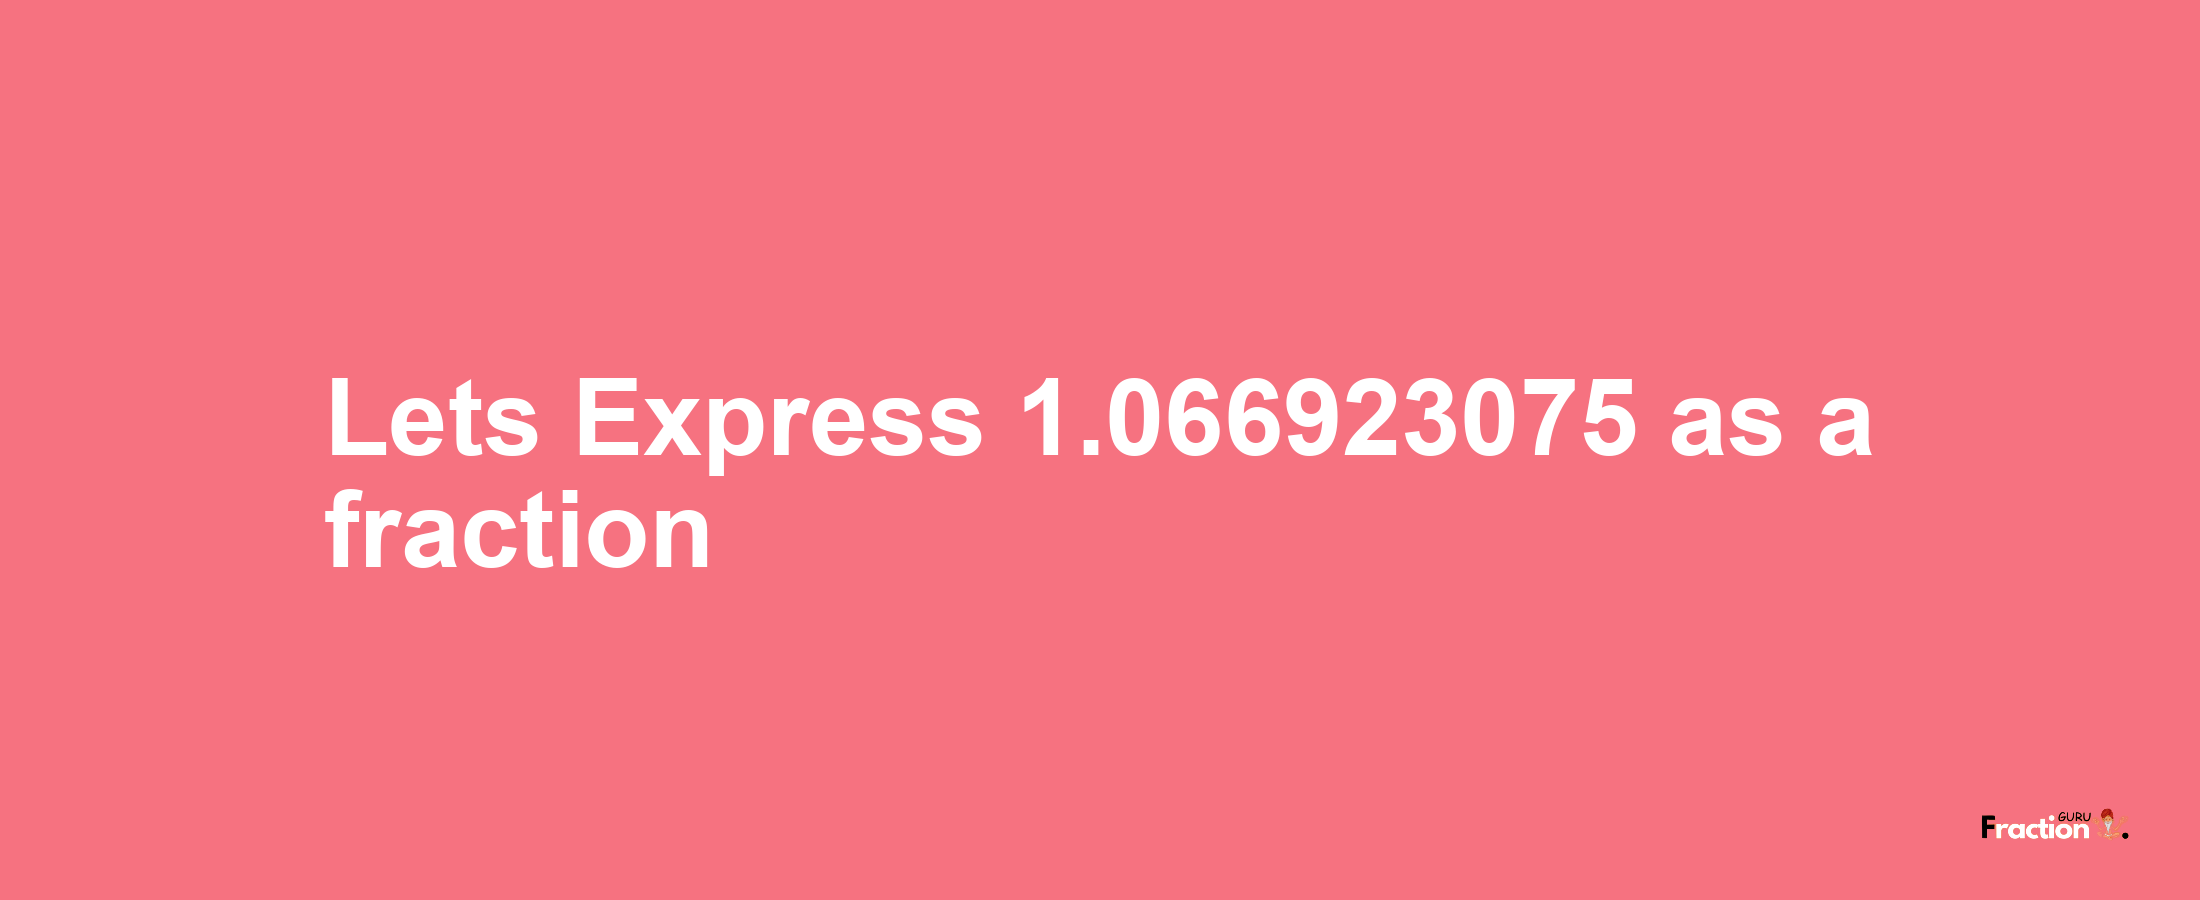 Lets Express 1.066923075 as afraction